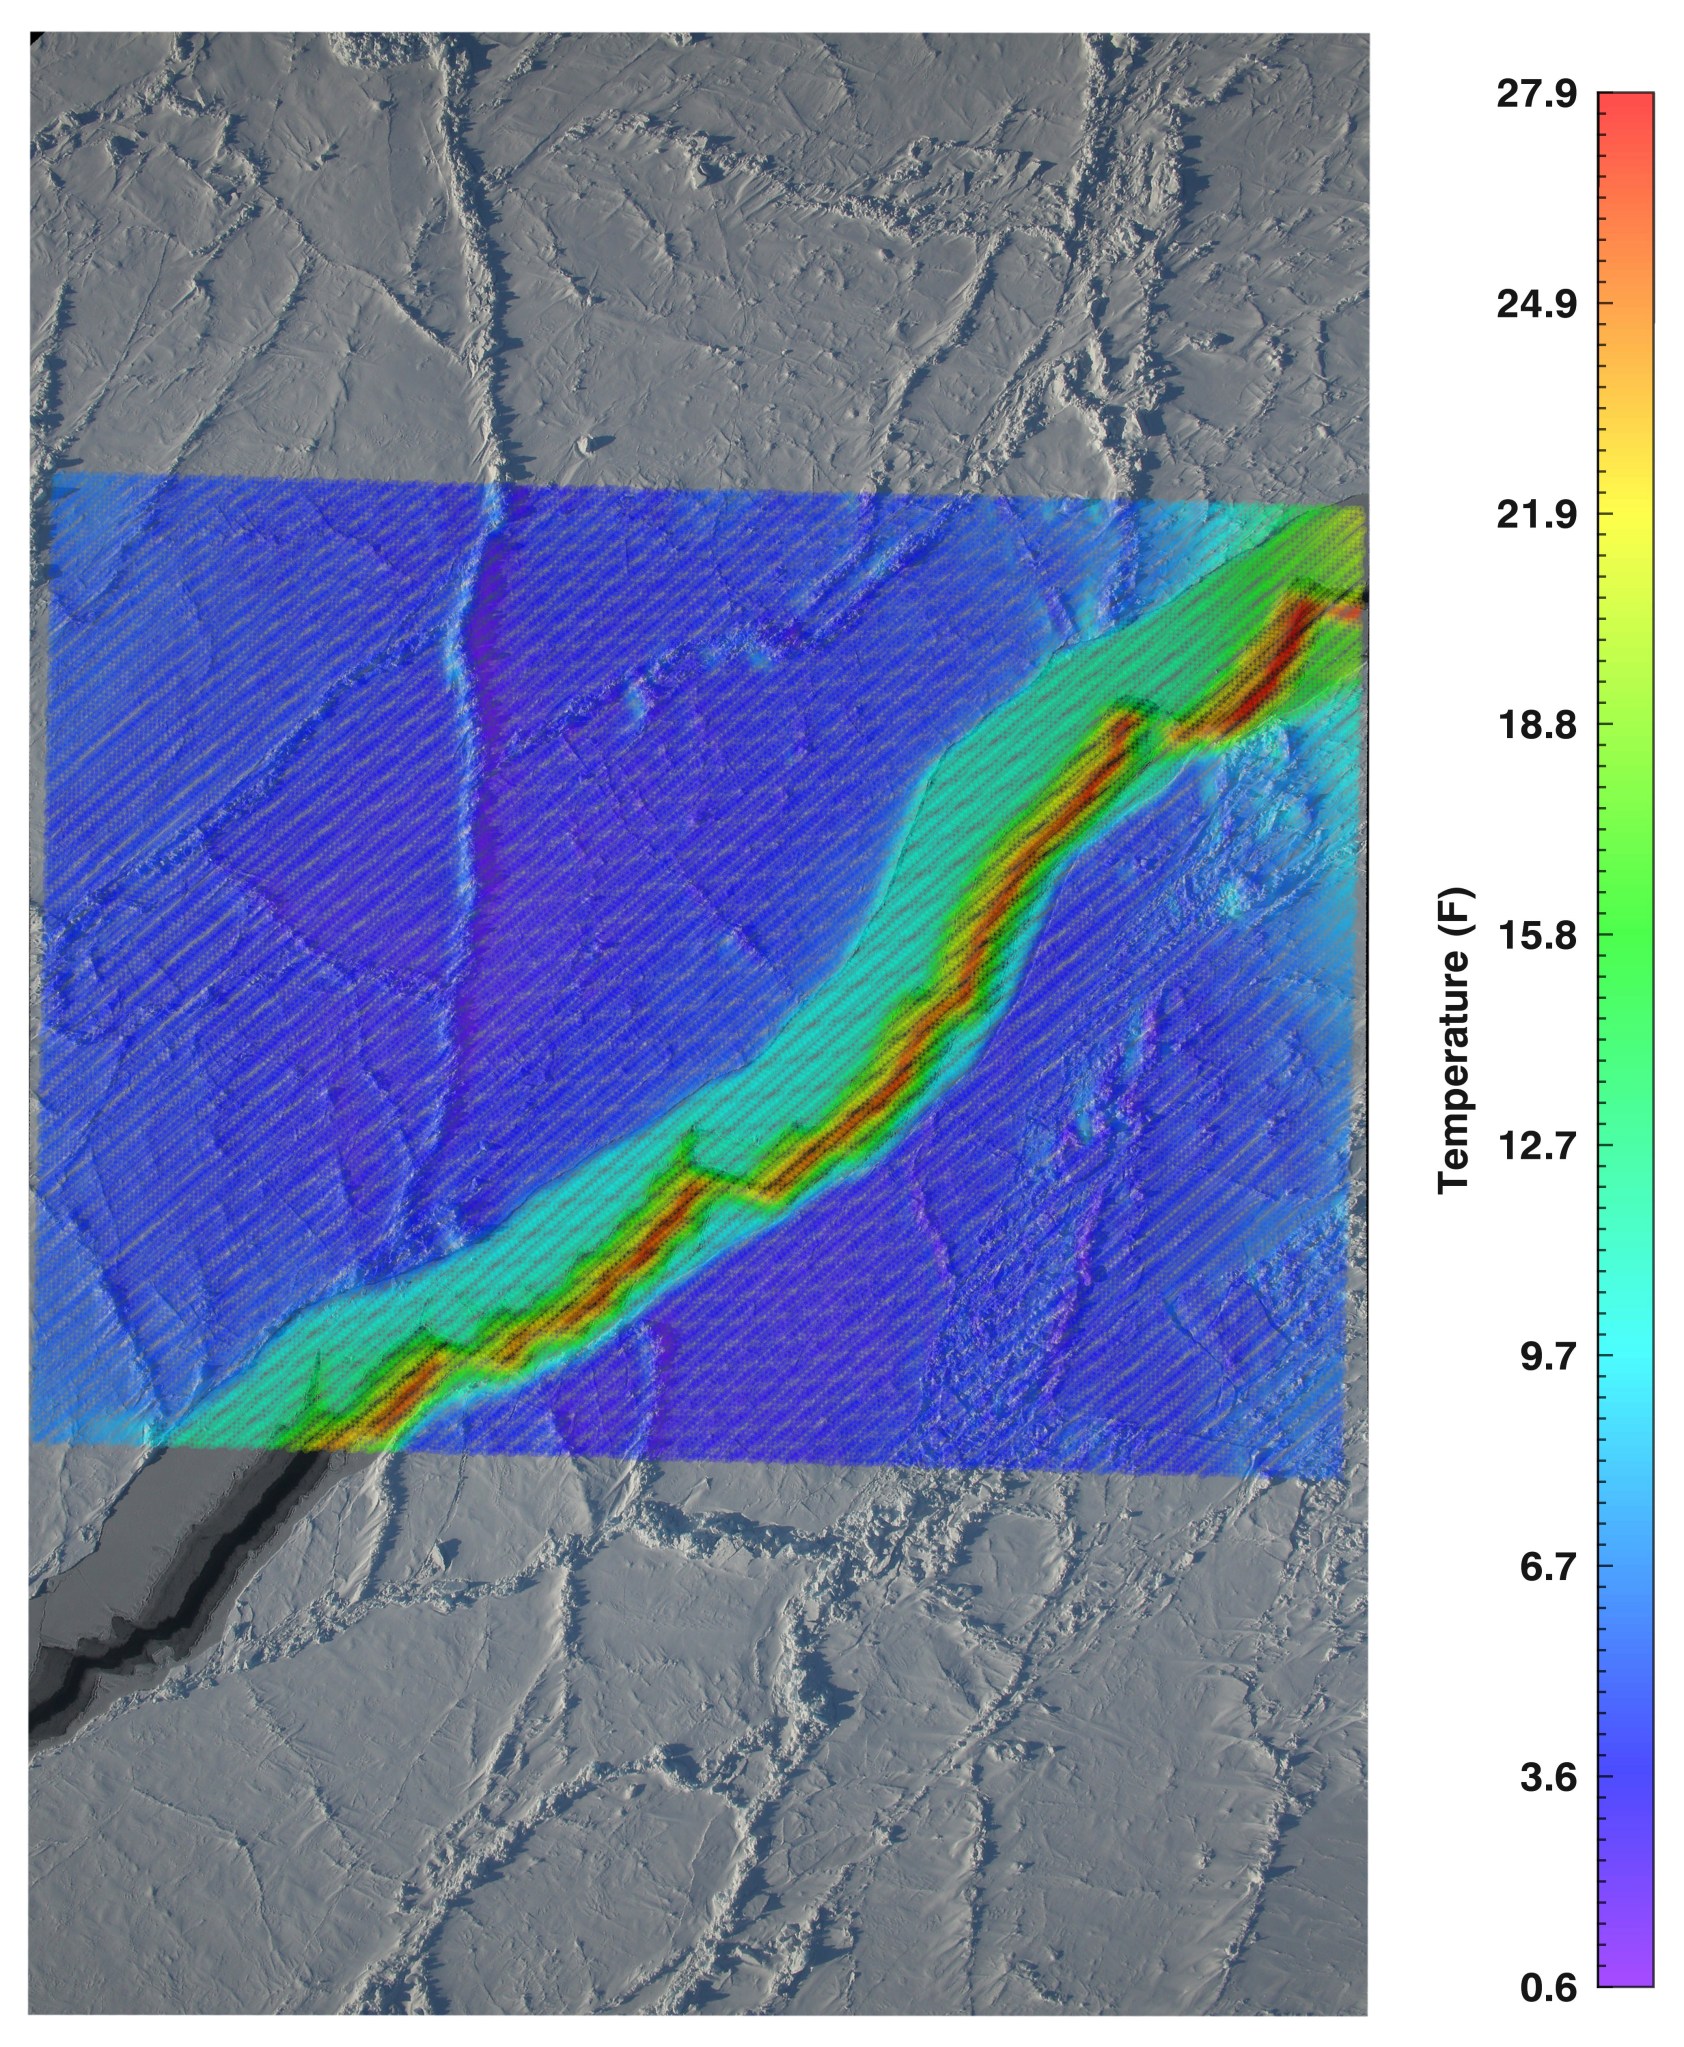 aerial view of sea ice with infrared overlay and crack